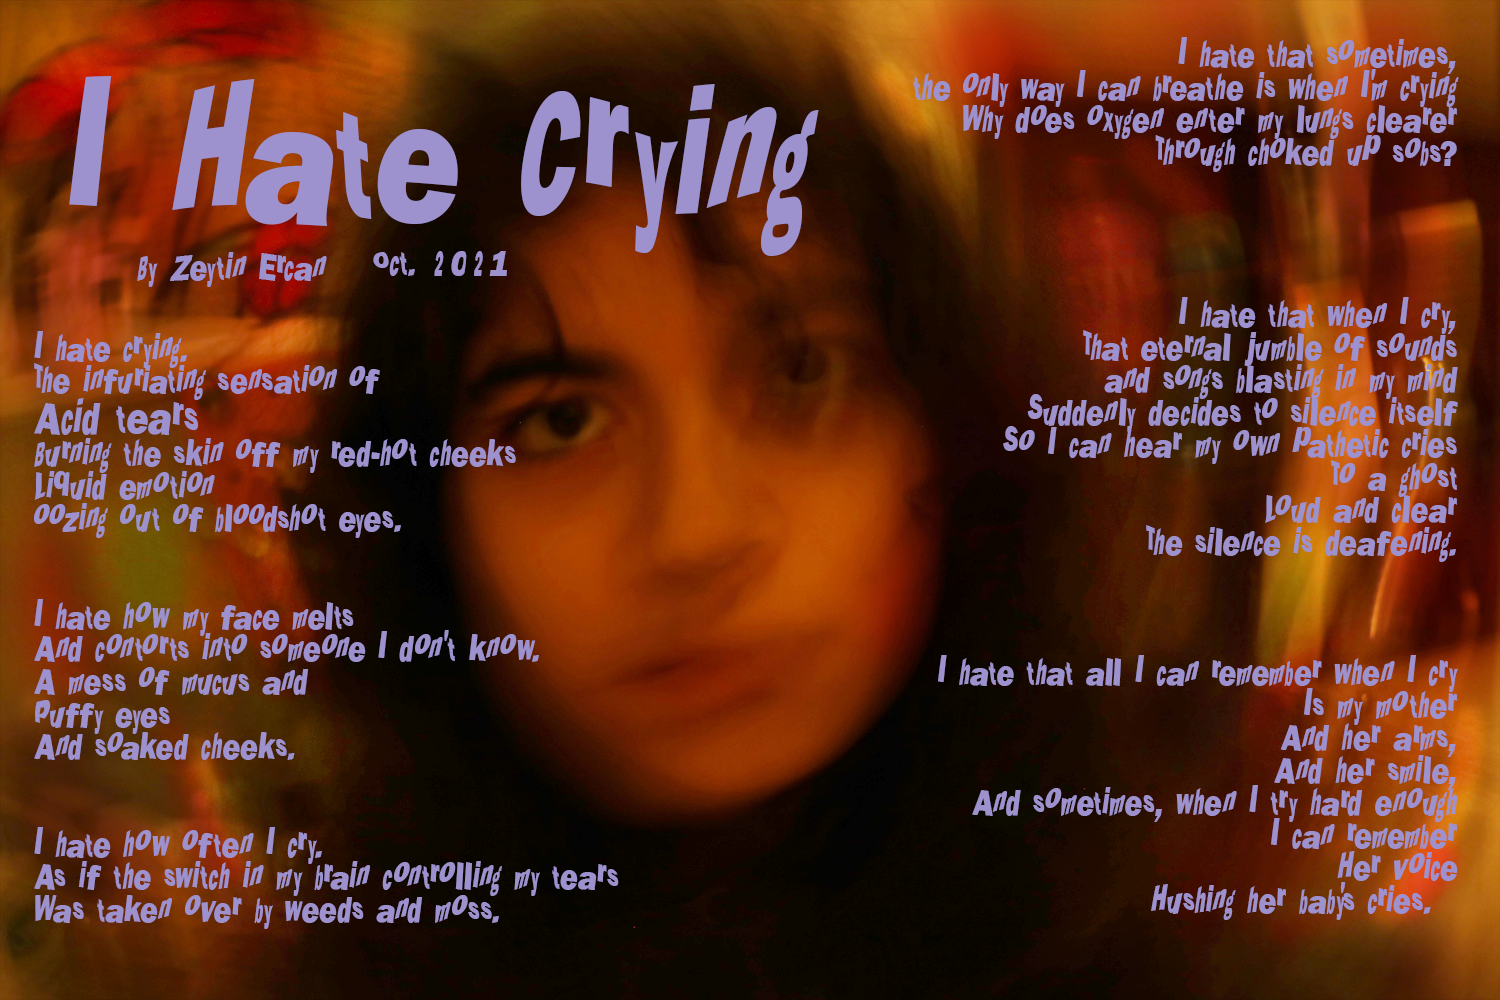 Poem by Zeytin Ercan I Hate Crying